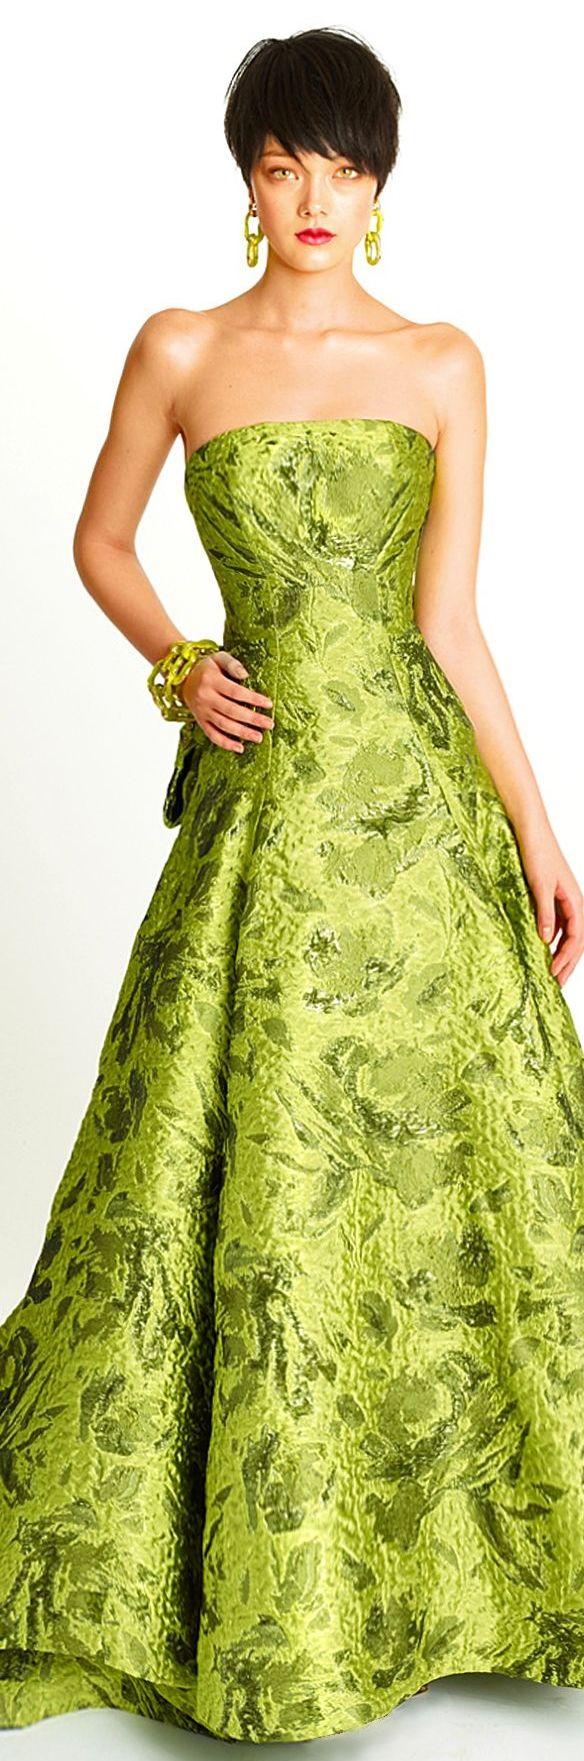 Wedding - Gowns.....Gorgeous Greens